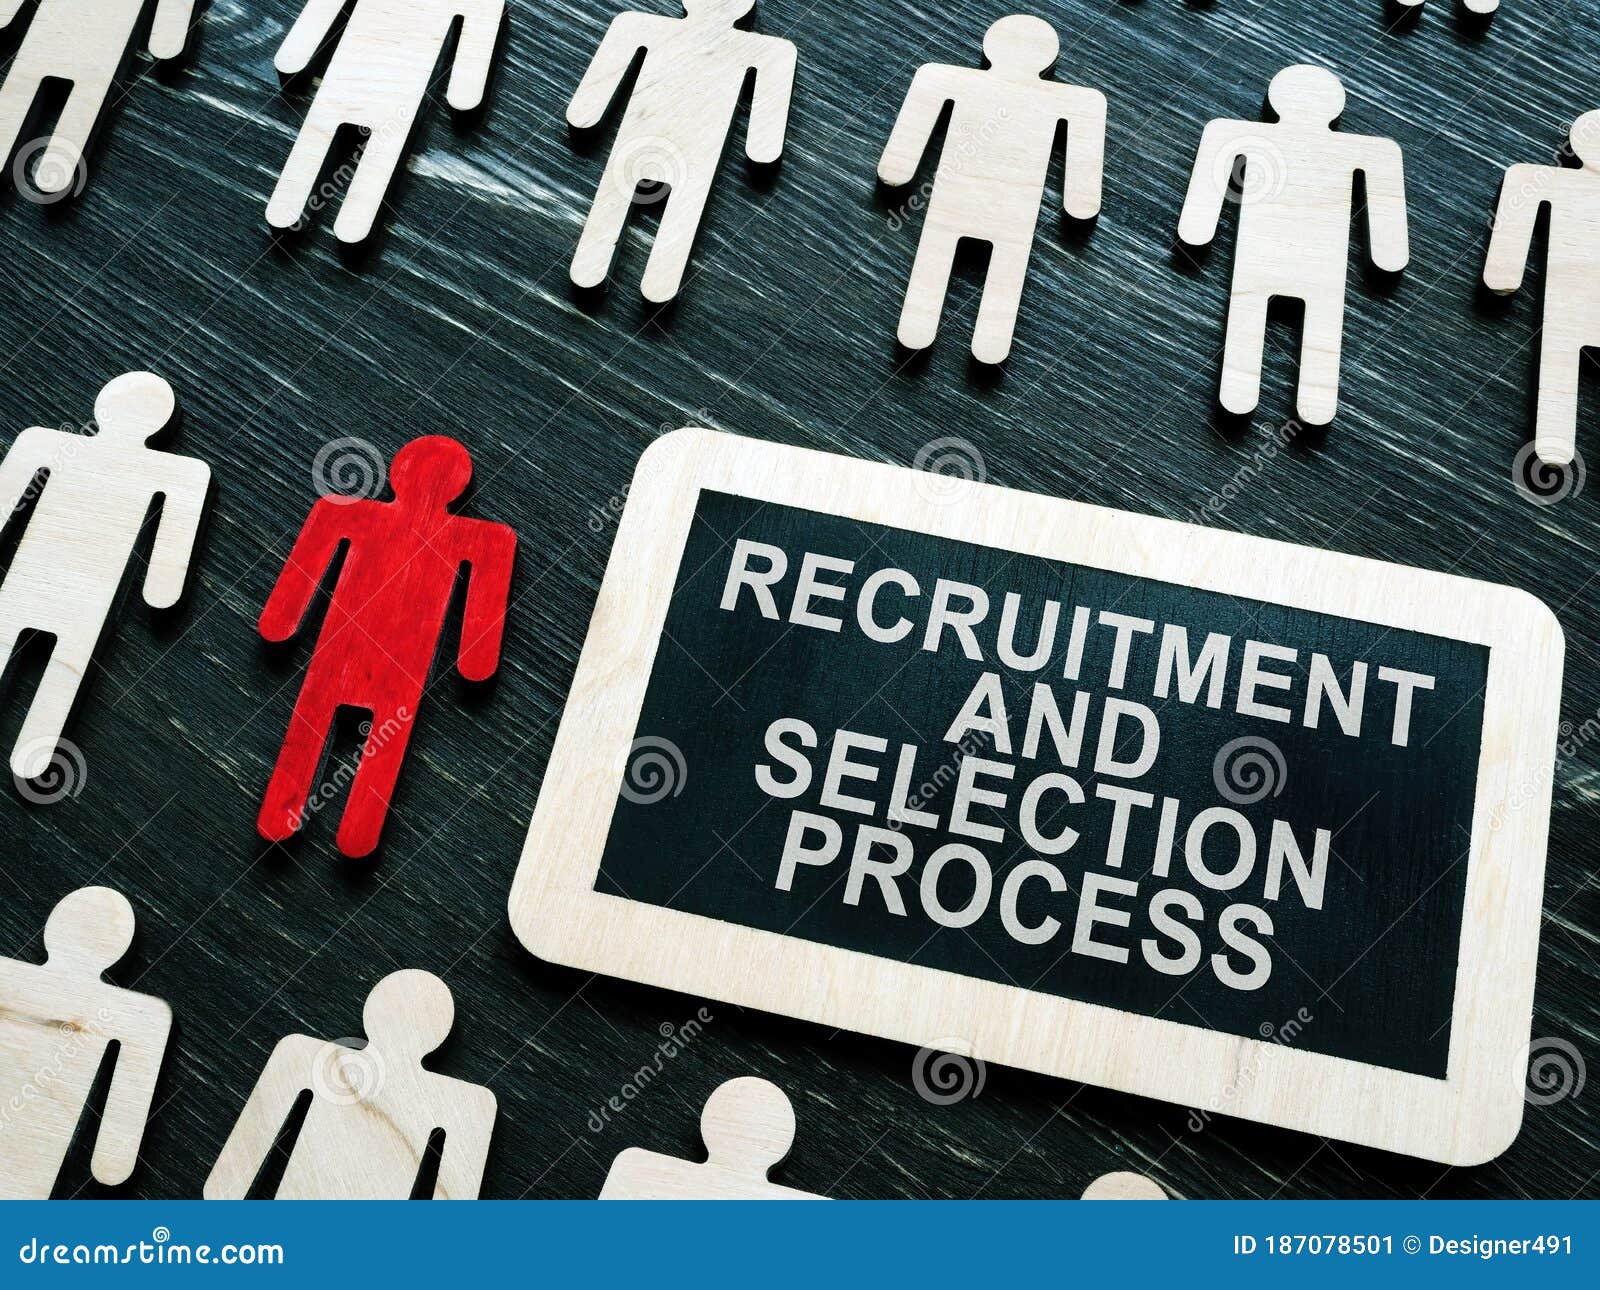 recruitment and selection process phrase and small figures and red one.